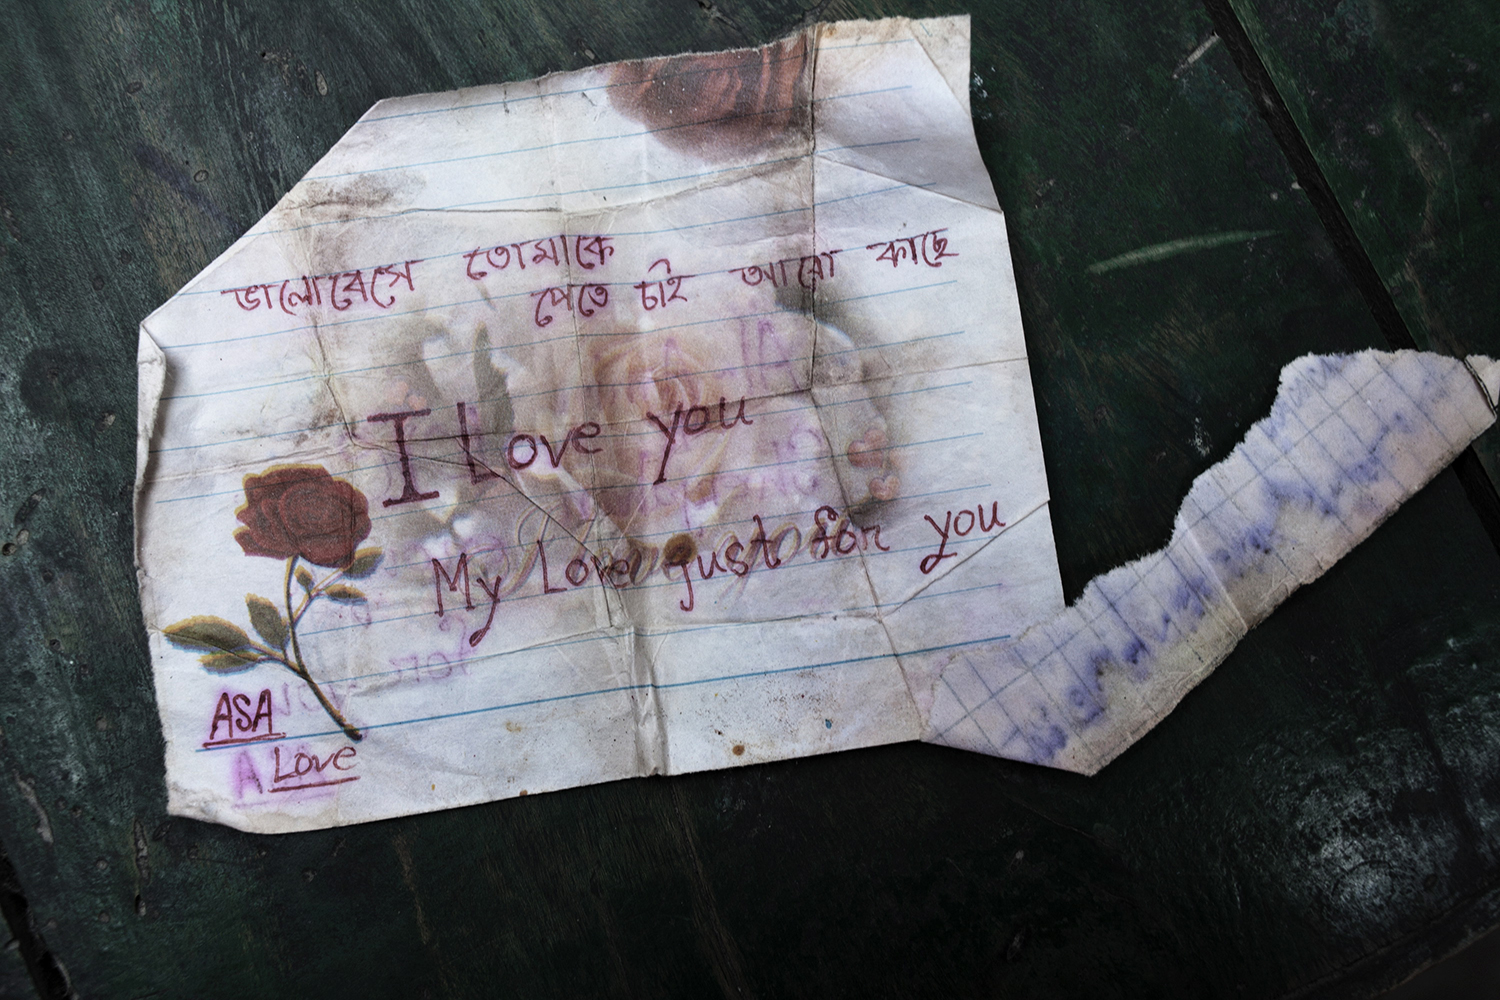 June 2, 2013. After the identification of the body of Al Amin (18), a  worker at Rana Plaza and brother of missing worker Shaheen Reza, his family discovers a letter in his pocket that his girlfriend wrote to him.